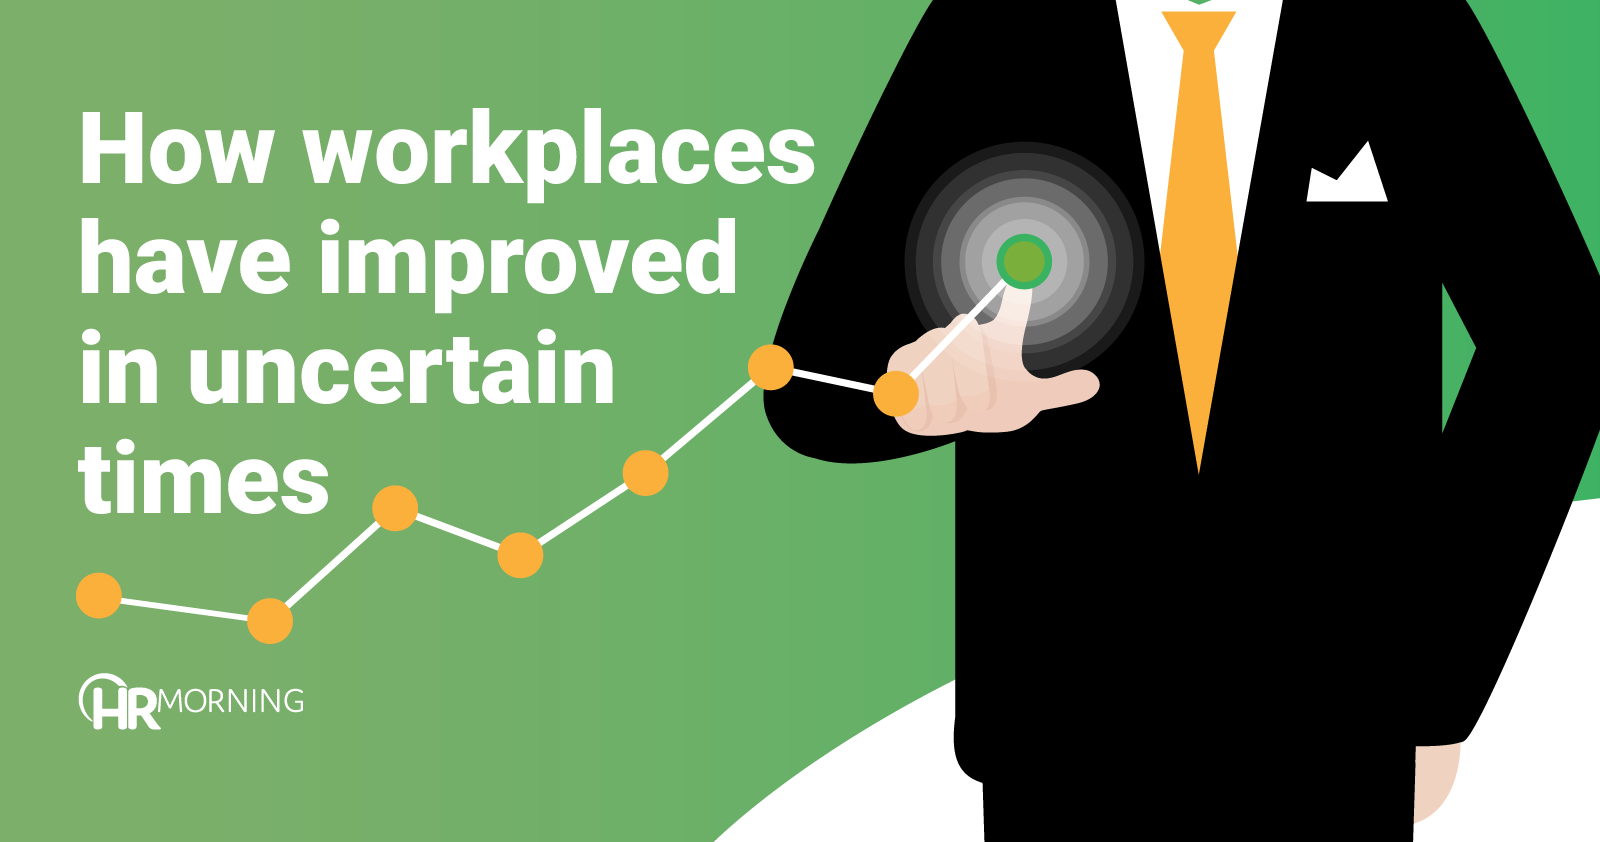 How workplaces have improved in uncertain times